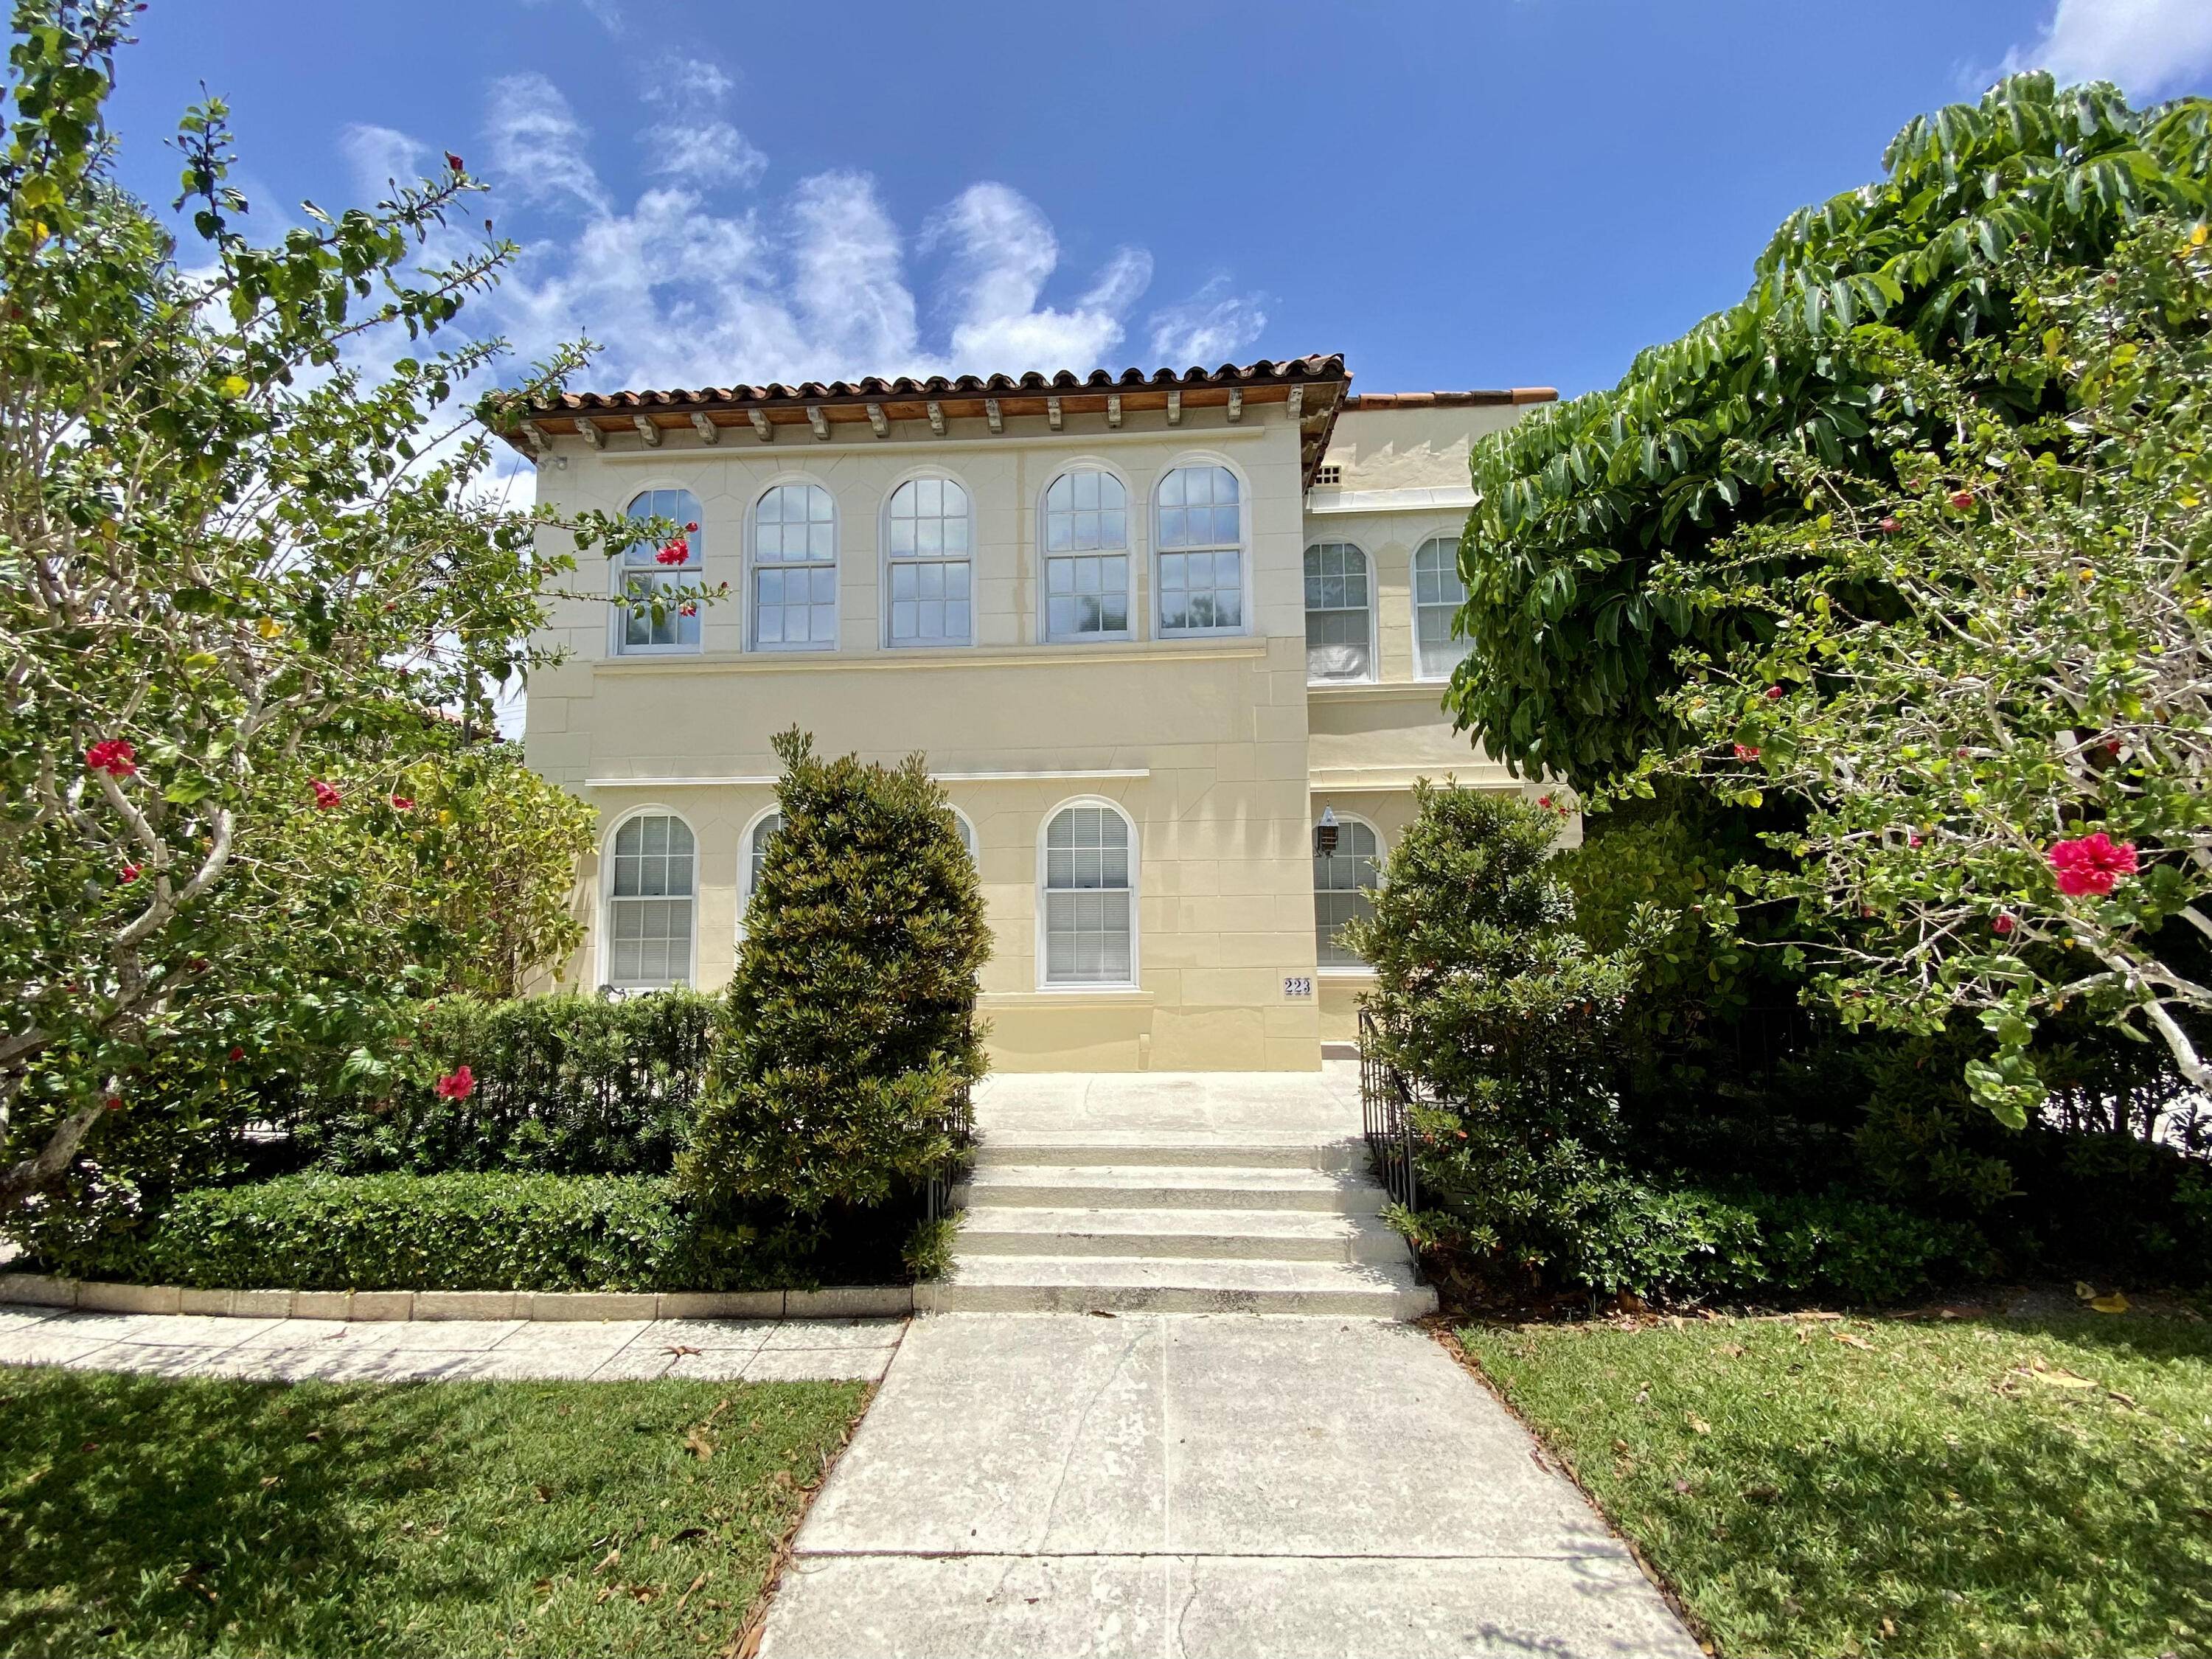 This 7 bedroom 6 1 2 bath two story Mediterranean historic home is situated on one of the best streets in town just a block from the ocean will make ...